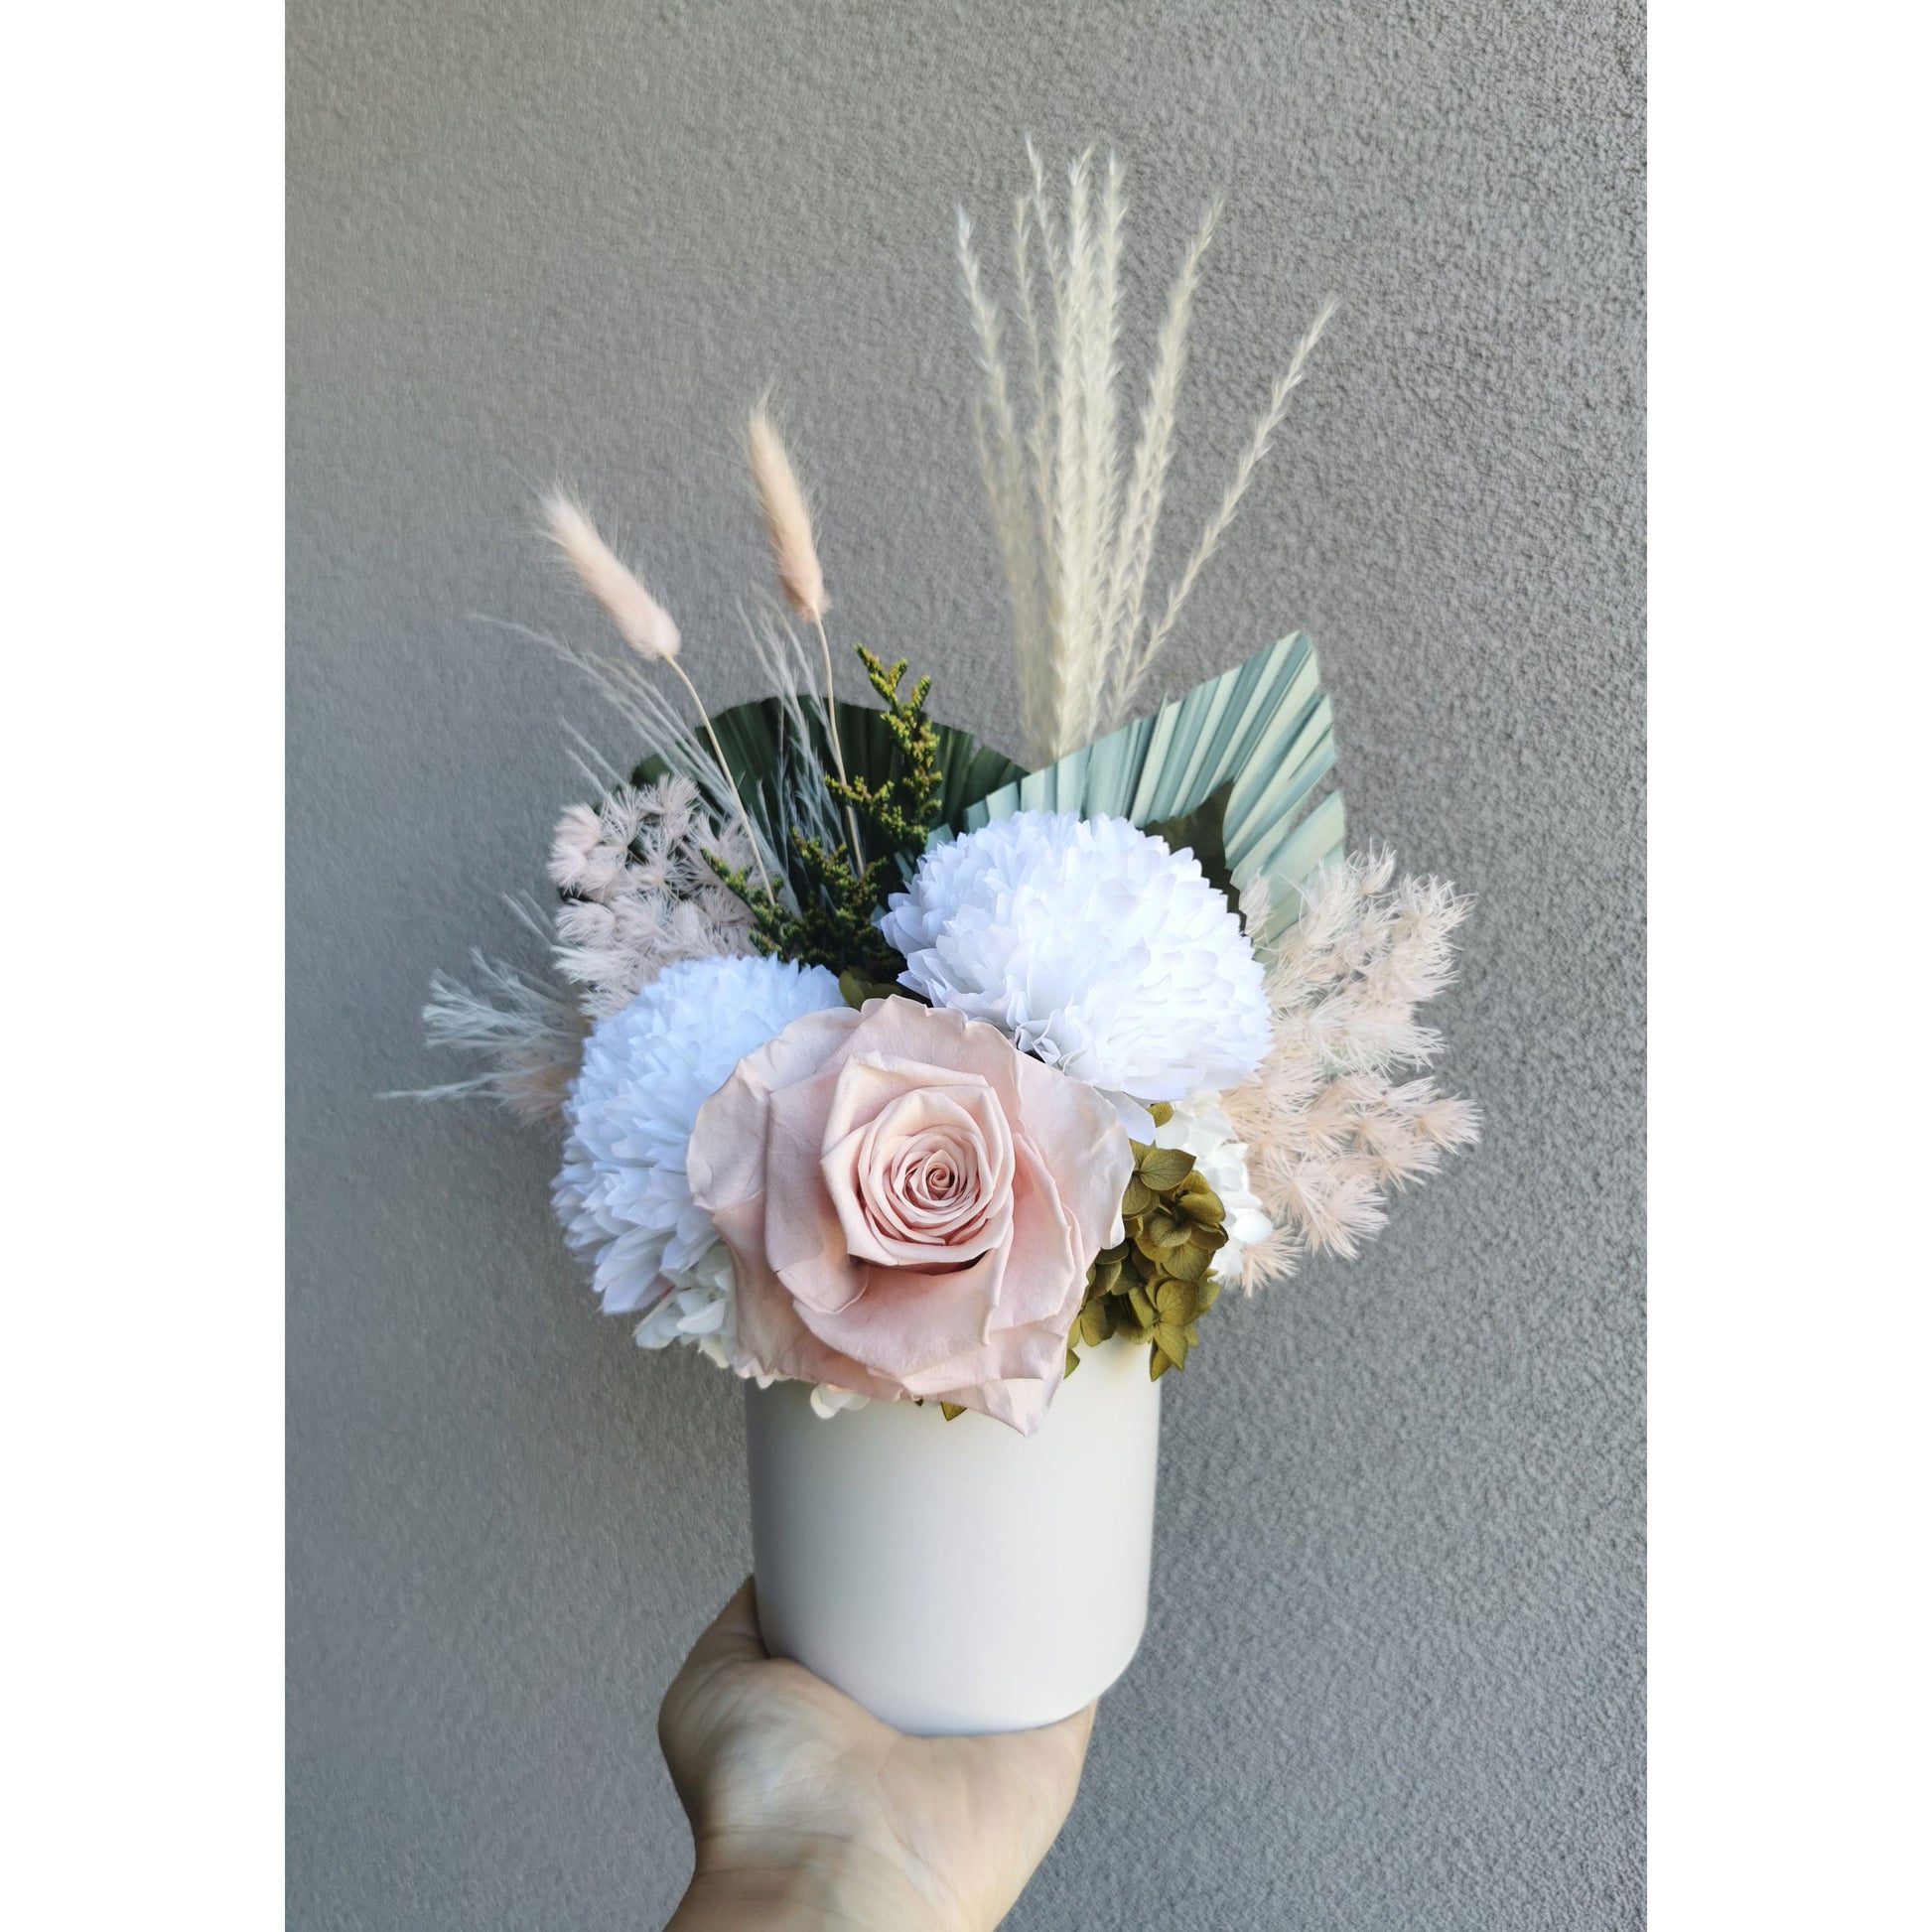 Pink, green & white dried & preserved flower arrangement in white pot. Photo shows arrangement being held by hand against a blank wall